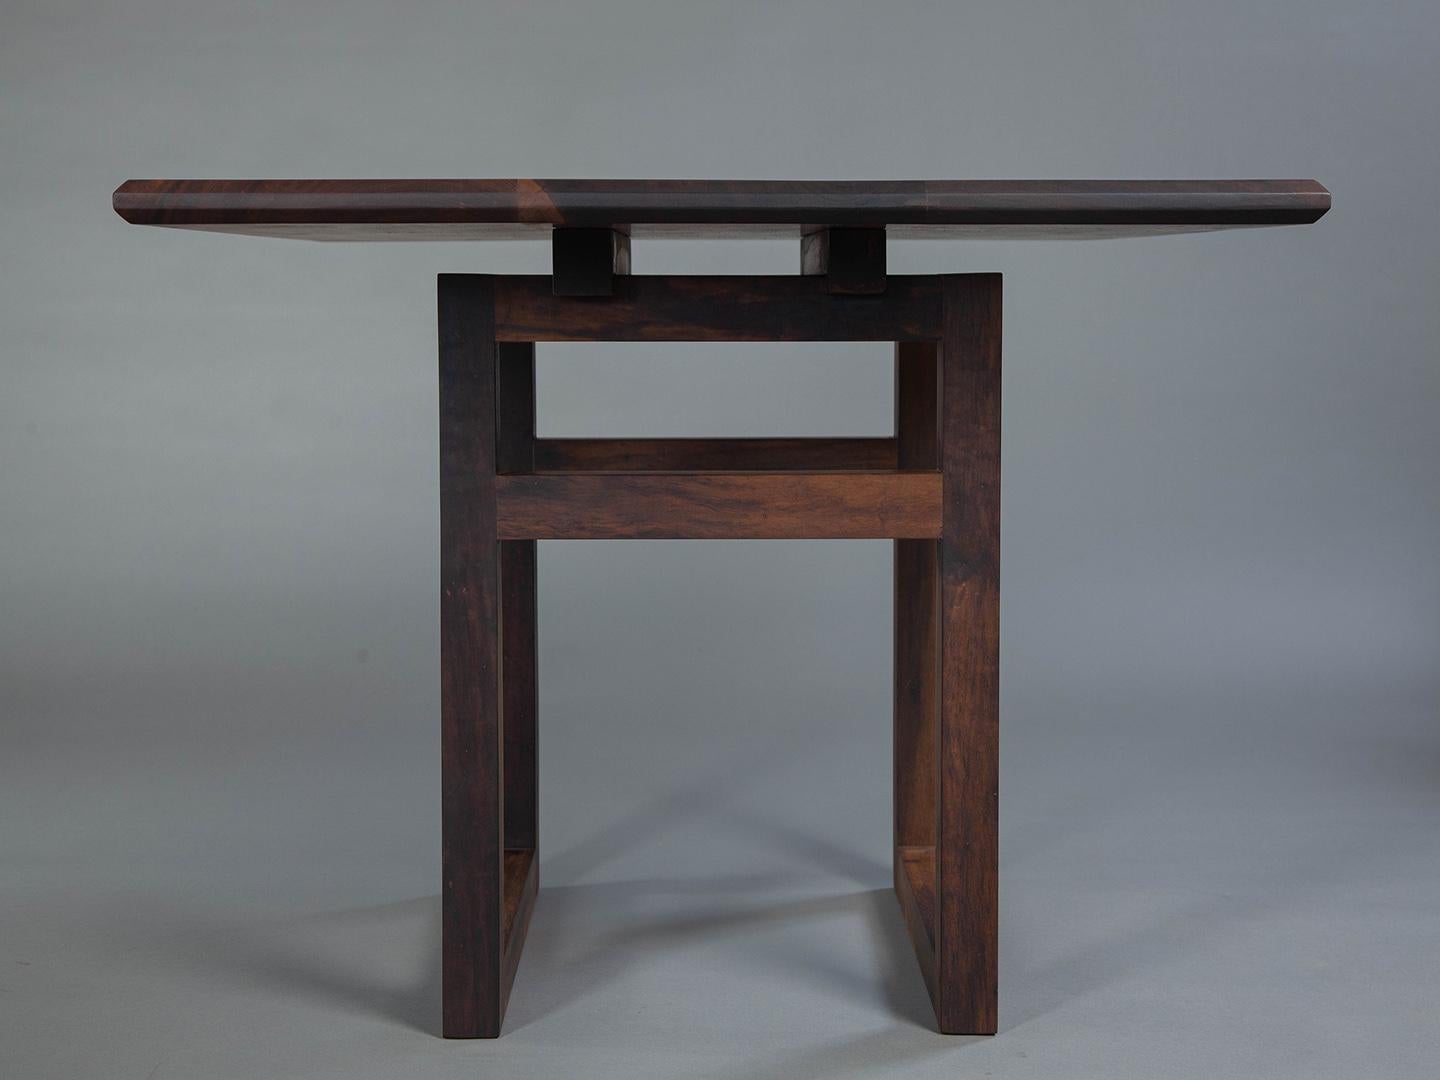 Hand-Crafted The Lubambo Side Table. Brazilian Solid Wood with tenons and joinery  For Sale